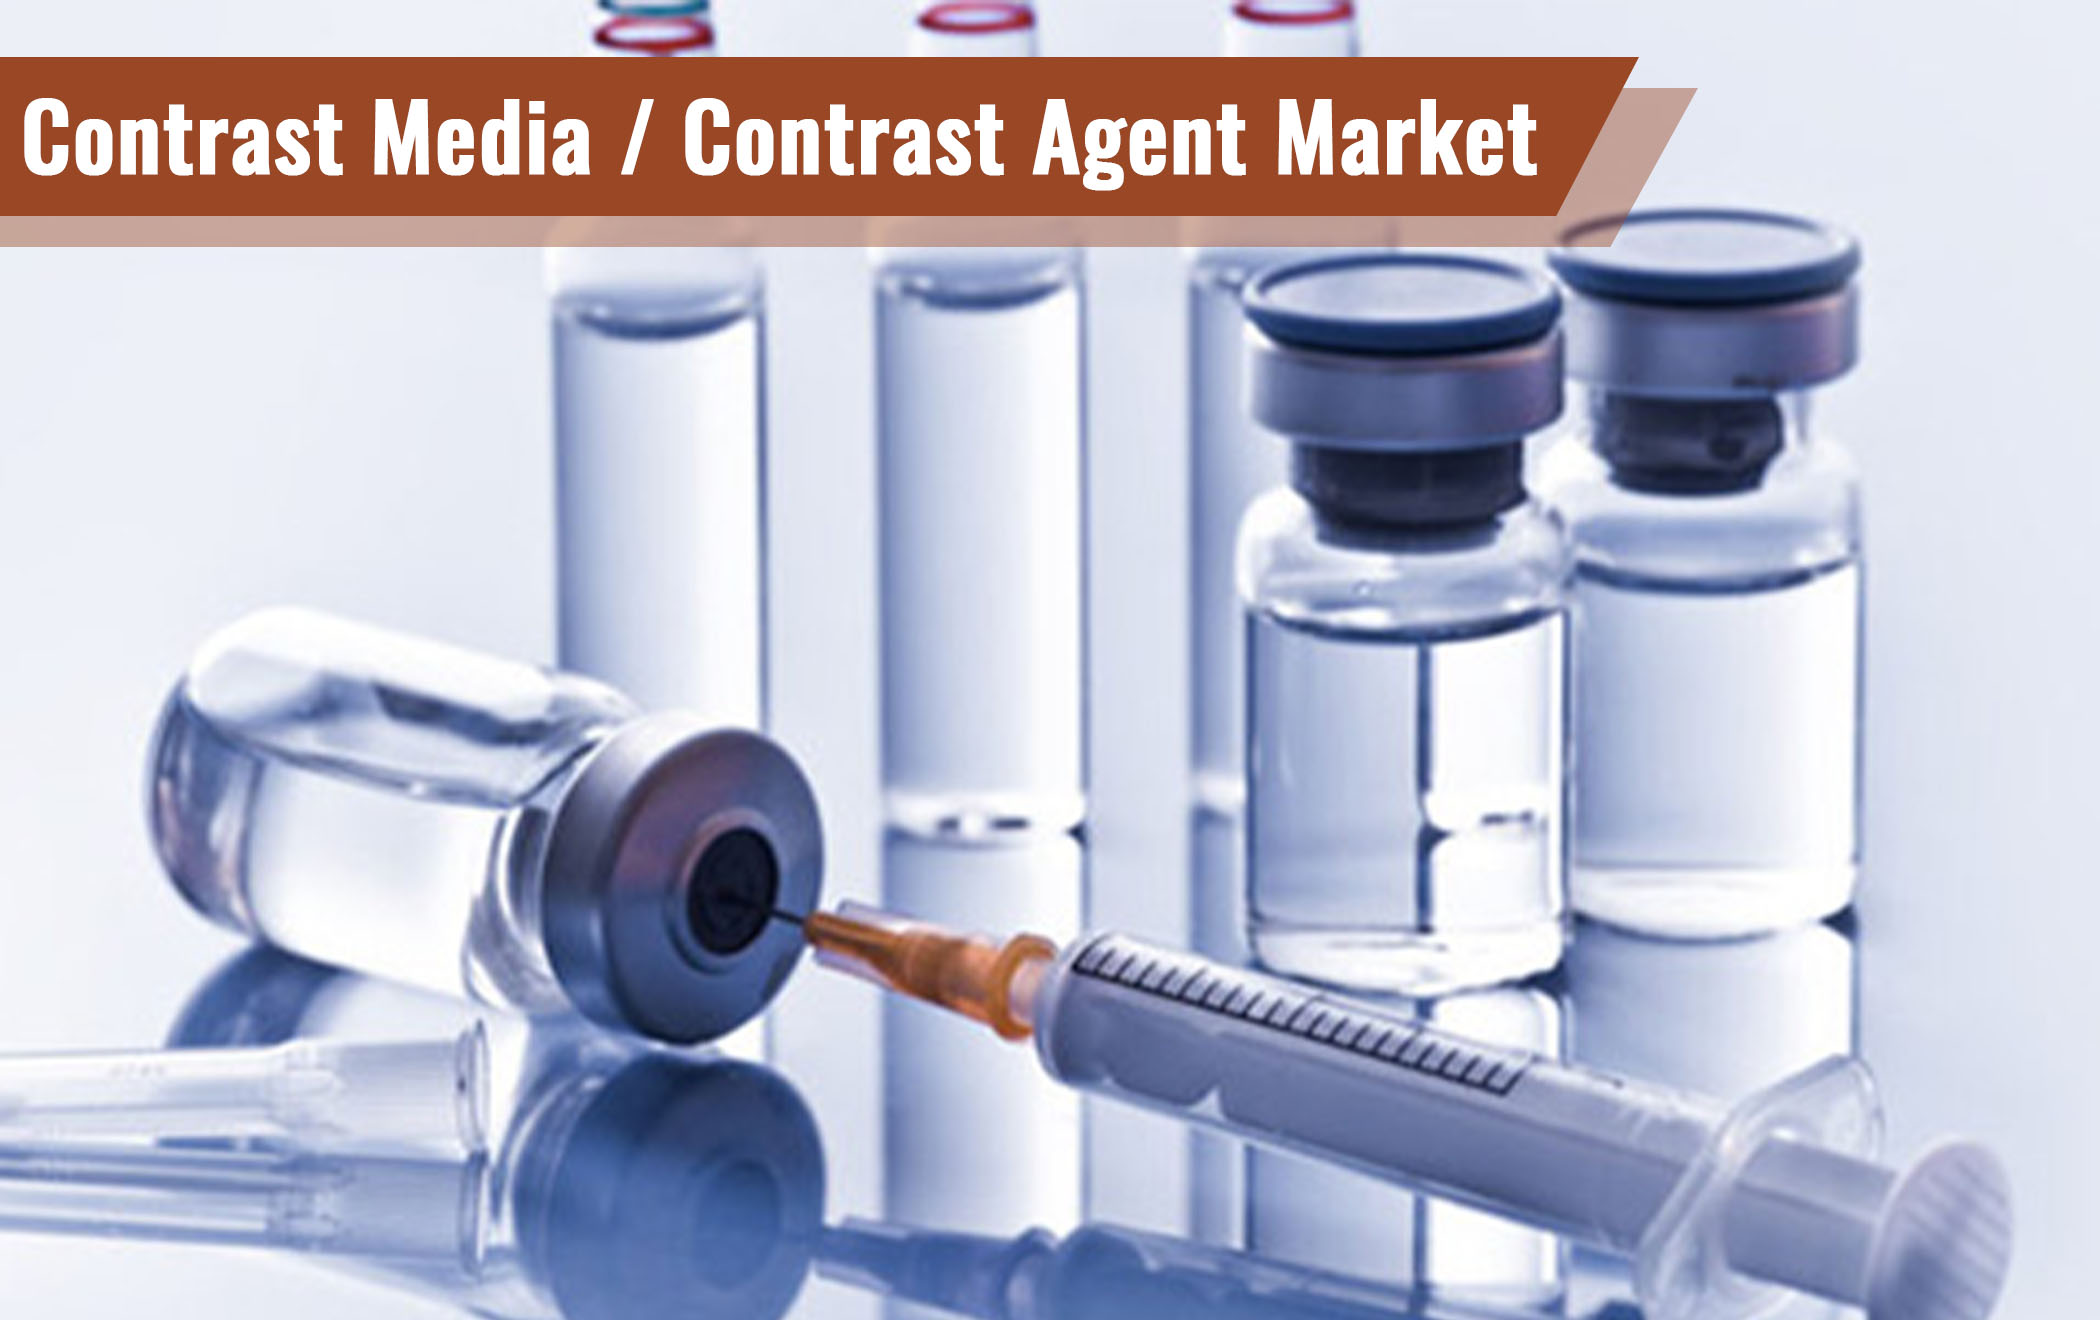 Contrast Media/Contrast Agent Market is Likely to Register a CAGR of 3.8% Between 2019 to 2030